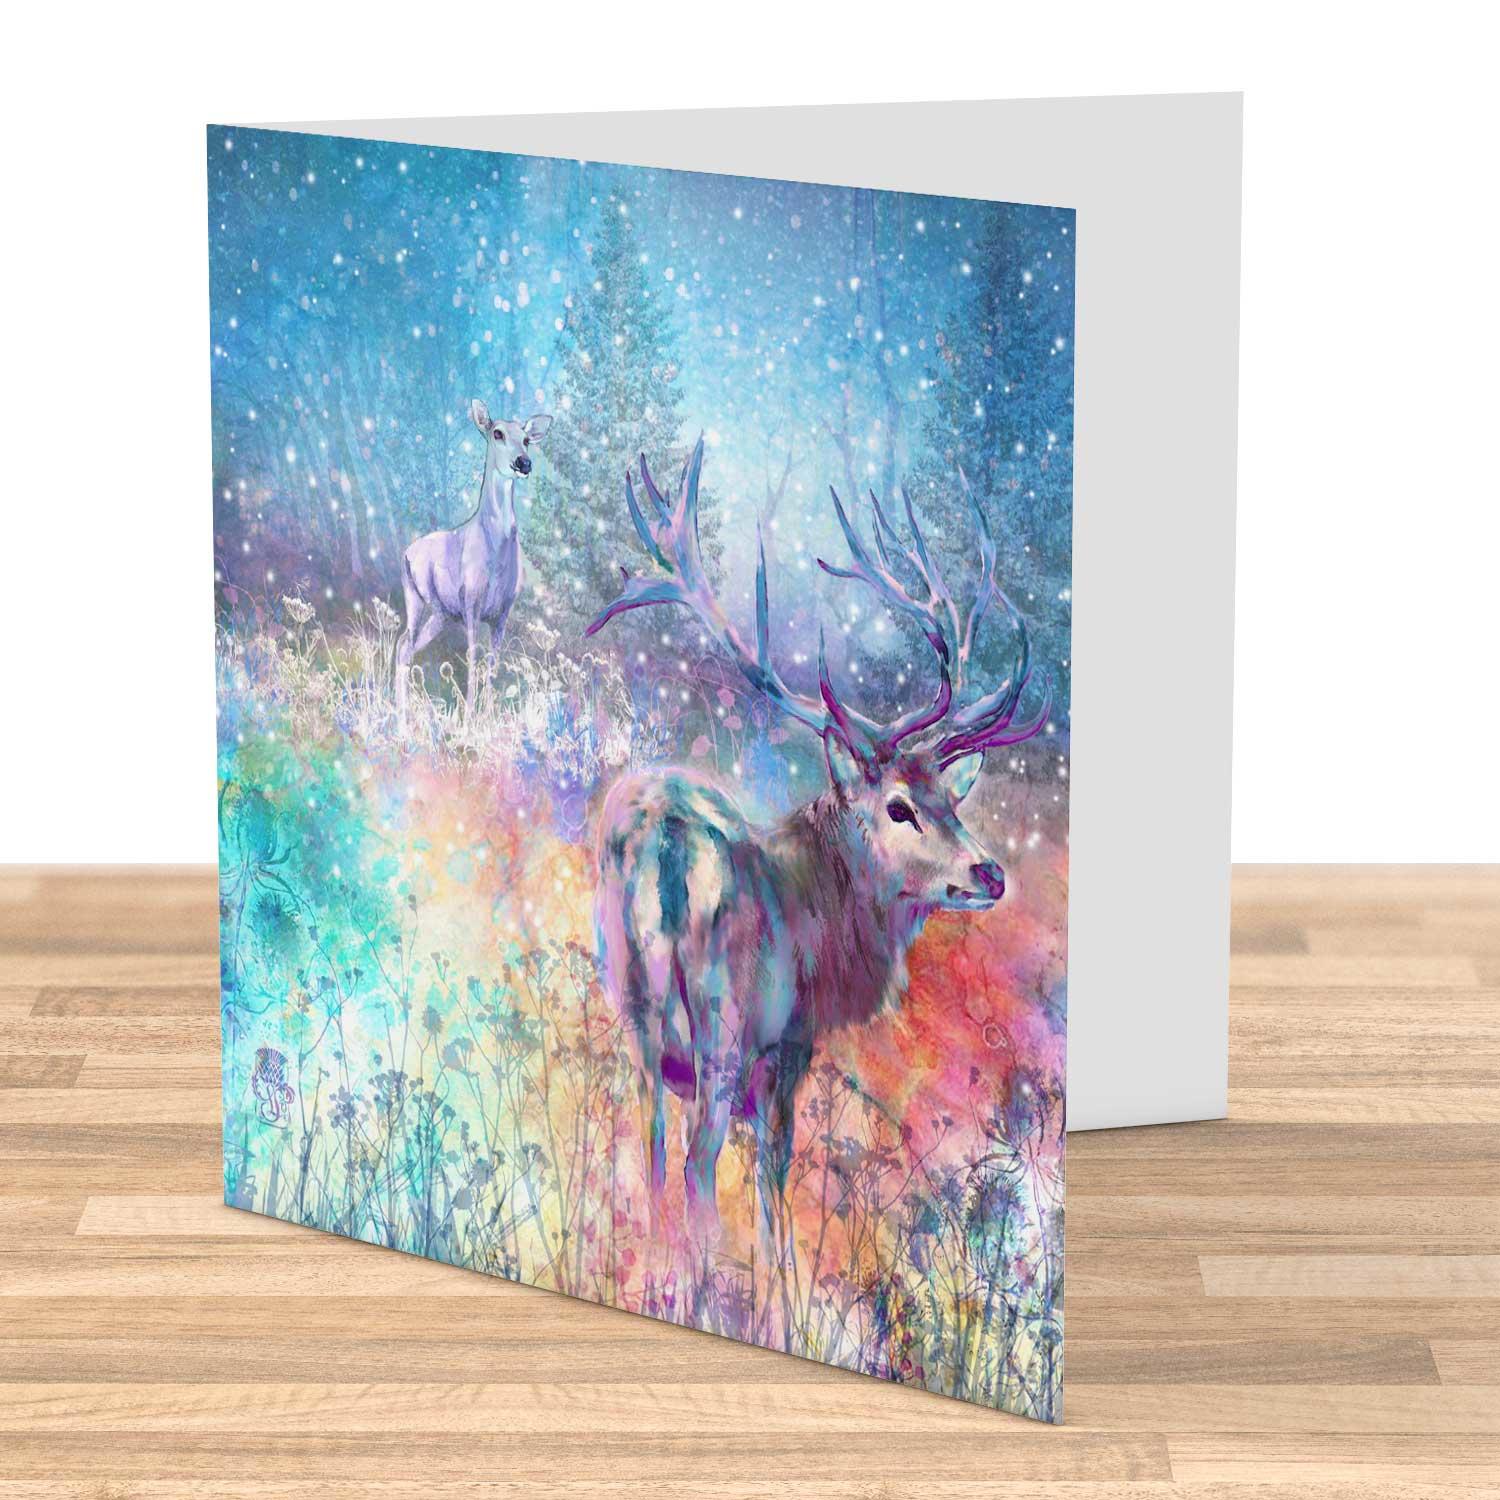 Stag Christmas Greeting Card from an original painting by artist Lee Scammacca